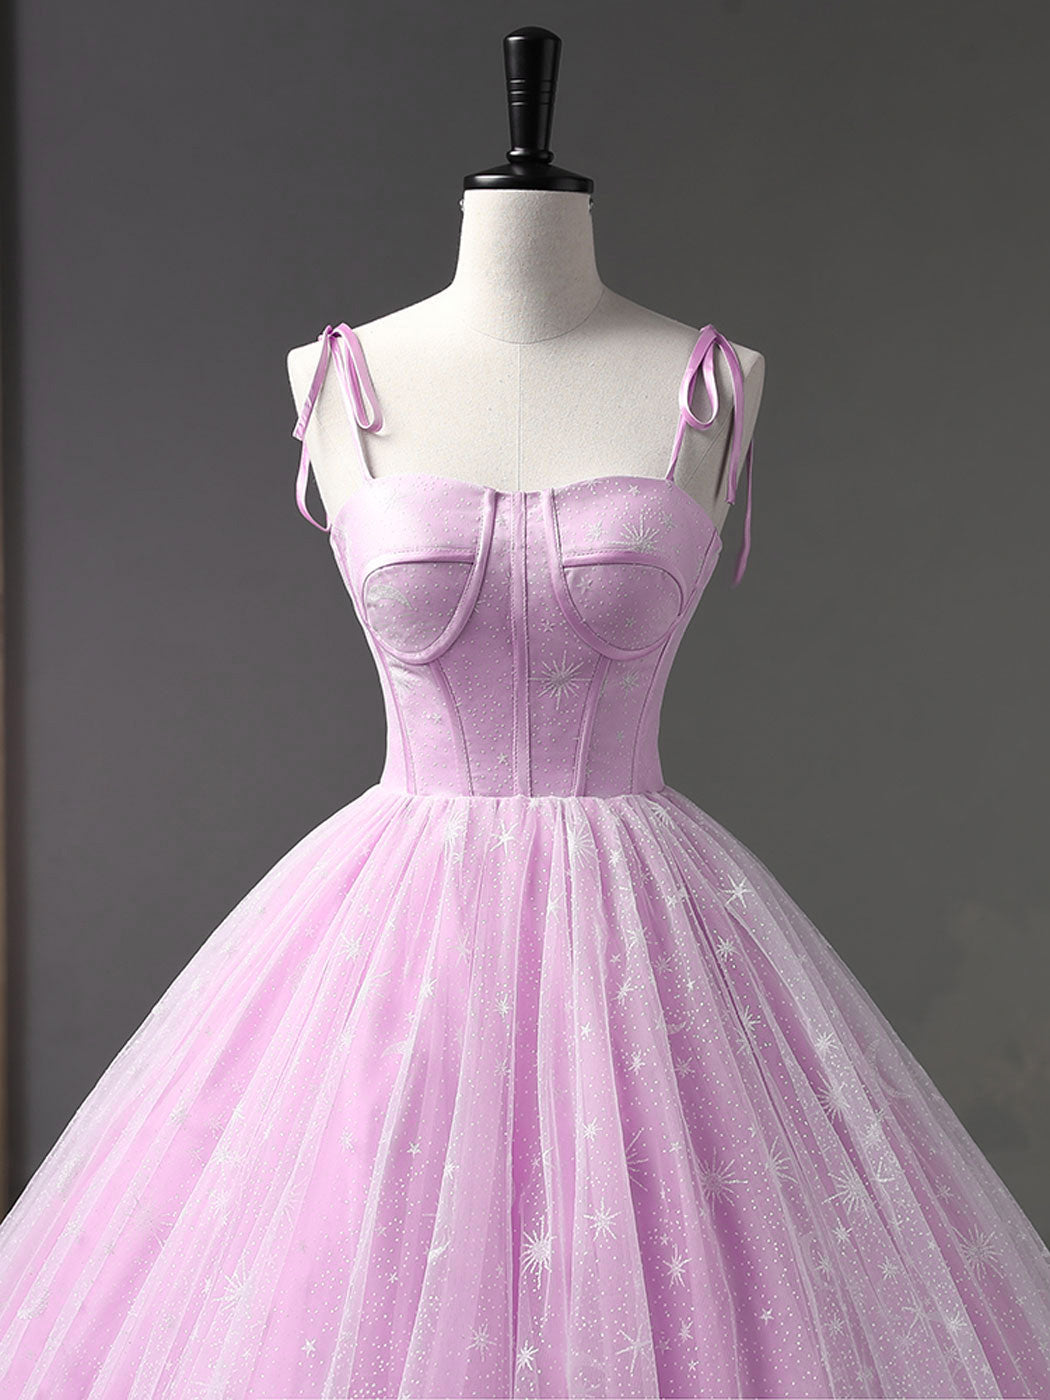 Lilac Ball Gown Corset Quinceanera Dress Sweet 16 Dress - DollyGown